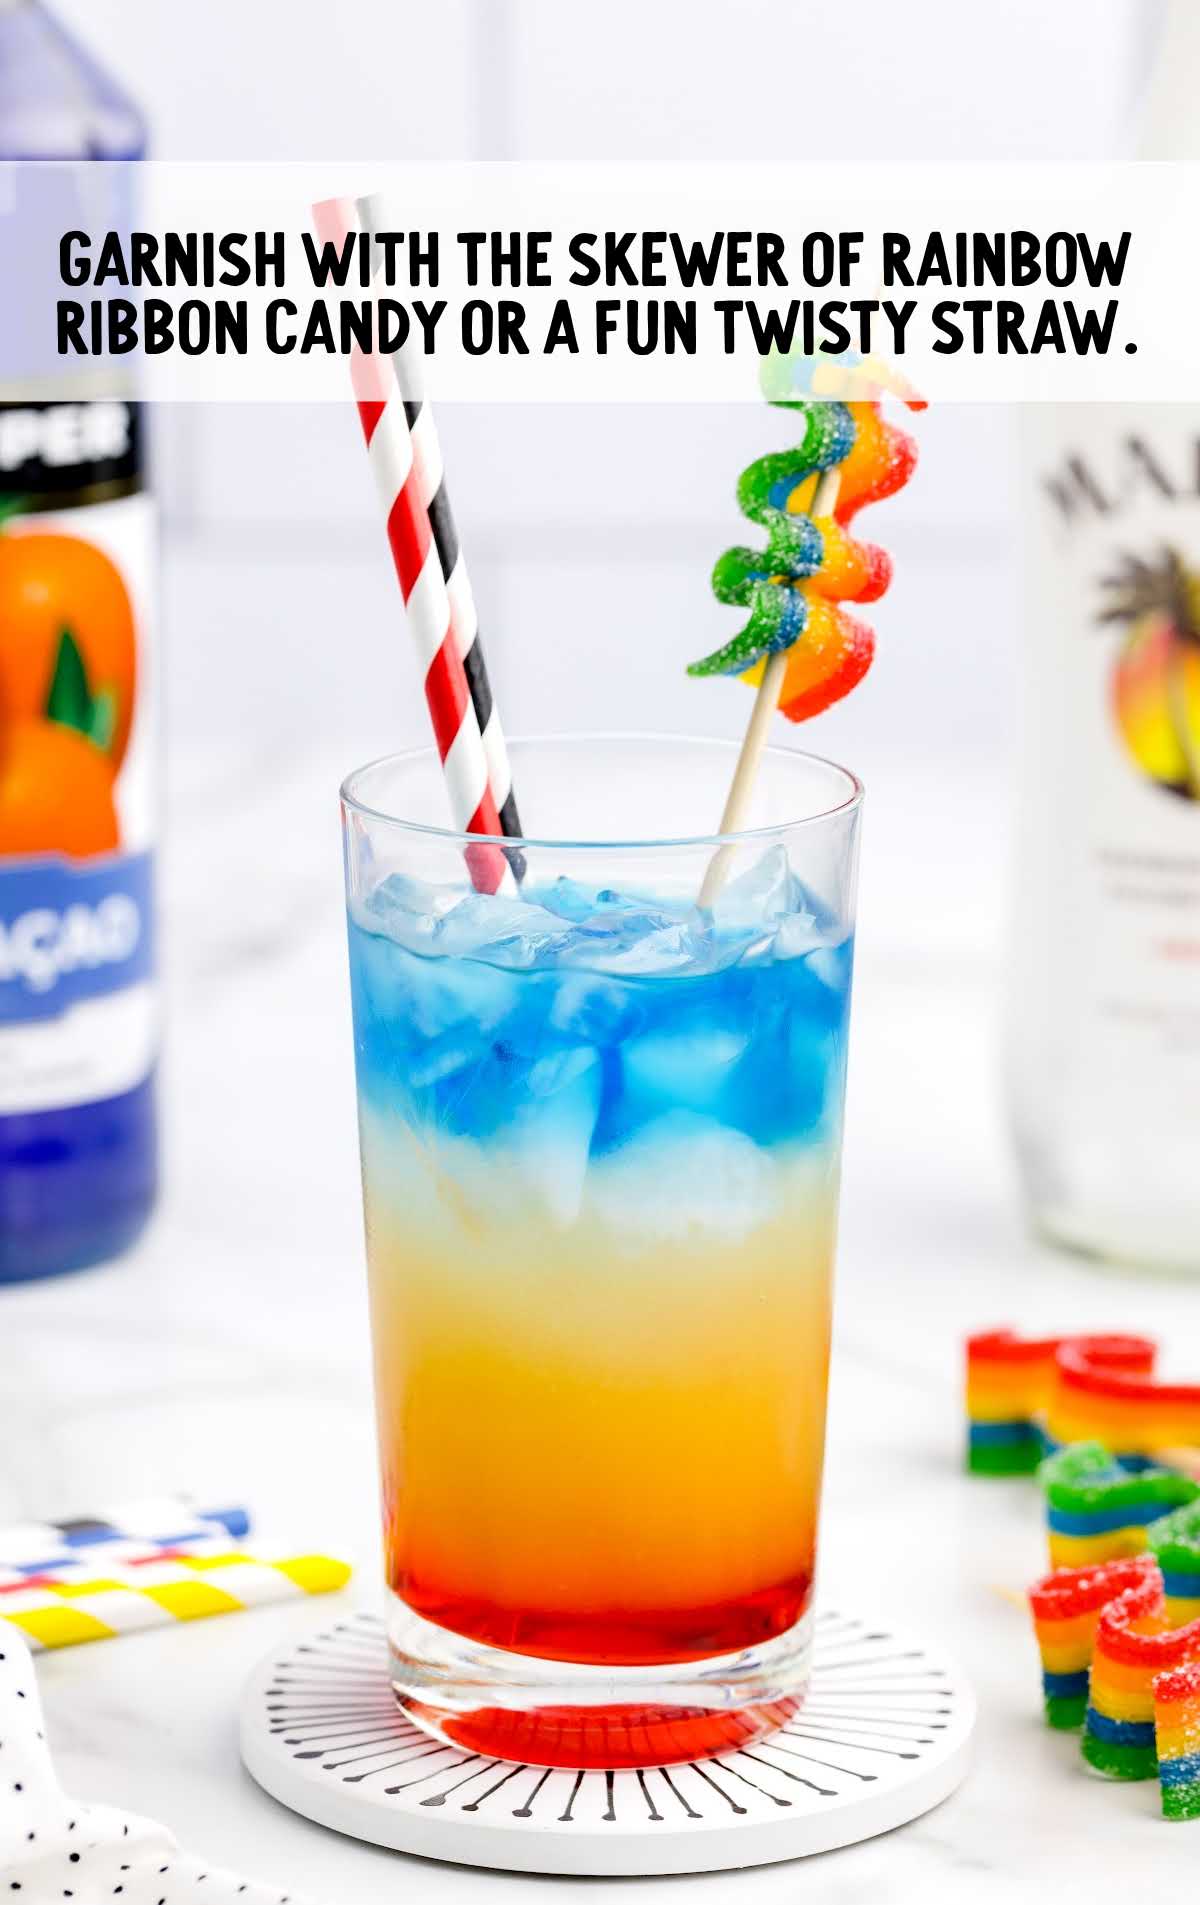 Rainbow Cocktail garnished with twisty straw and rainbow candy